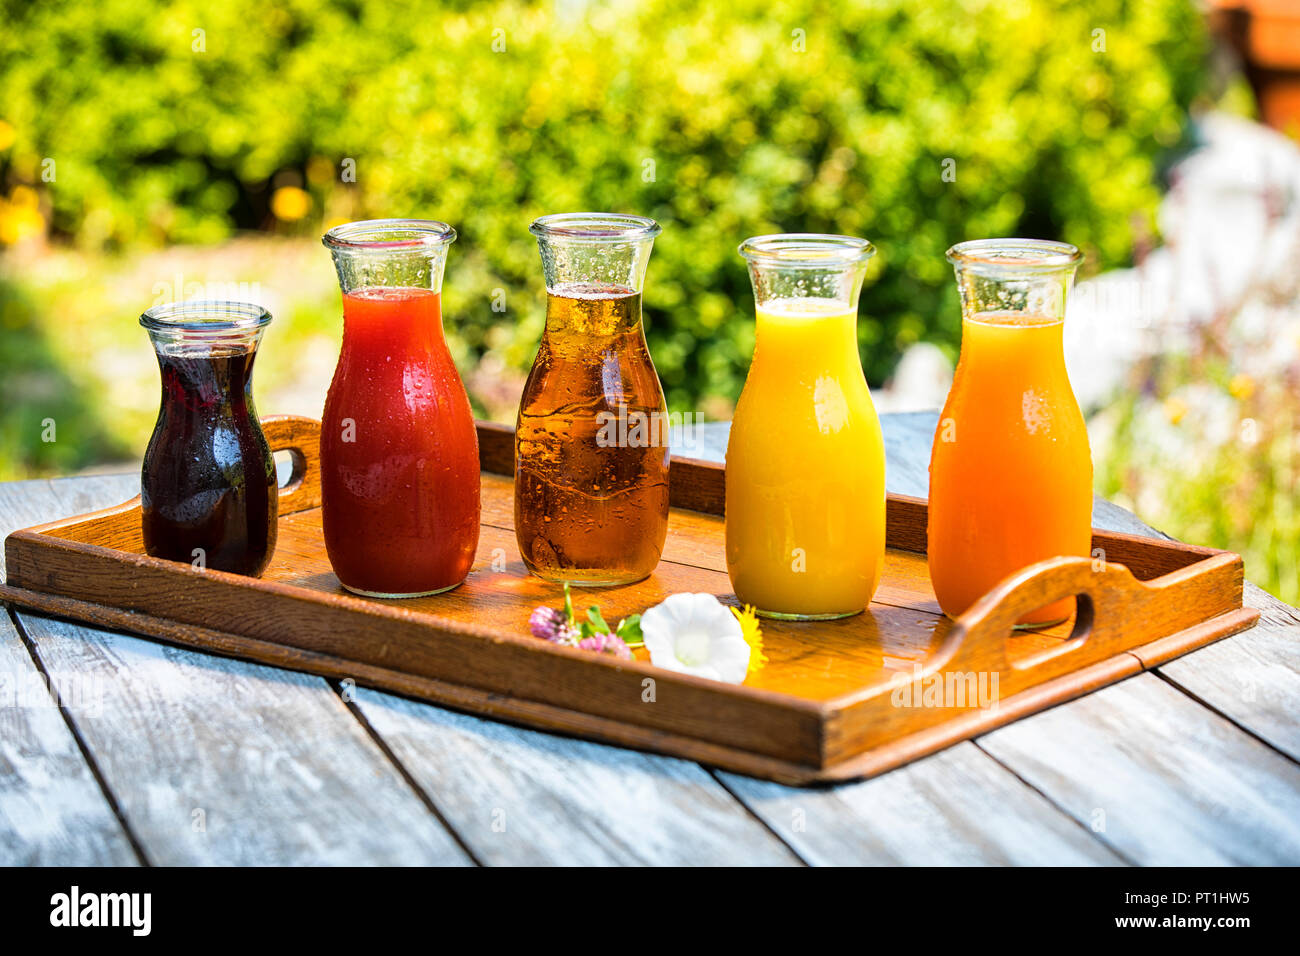 Glass bottles of various fruit juices on wooden tray Stock Photo